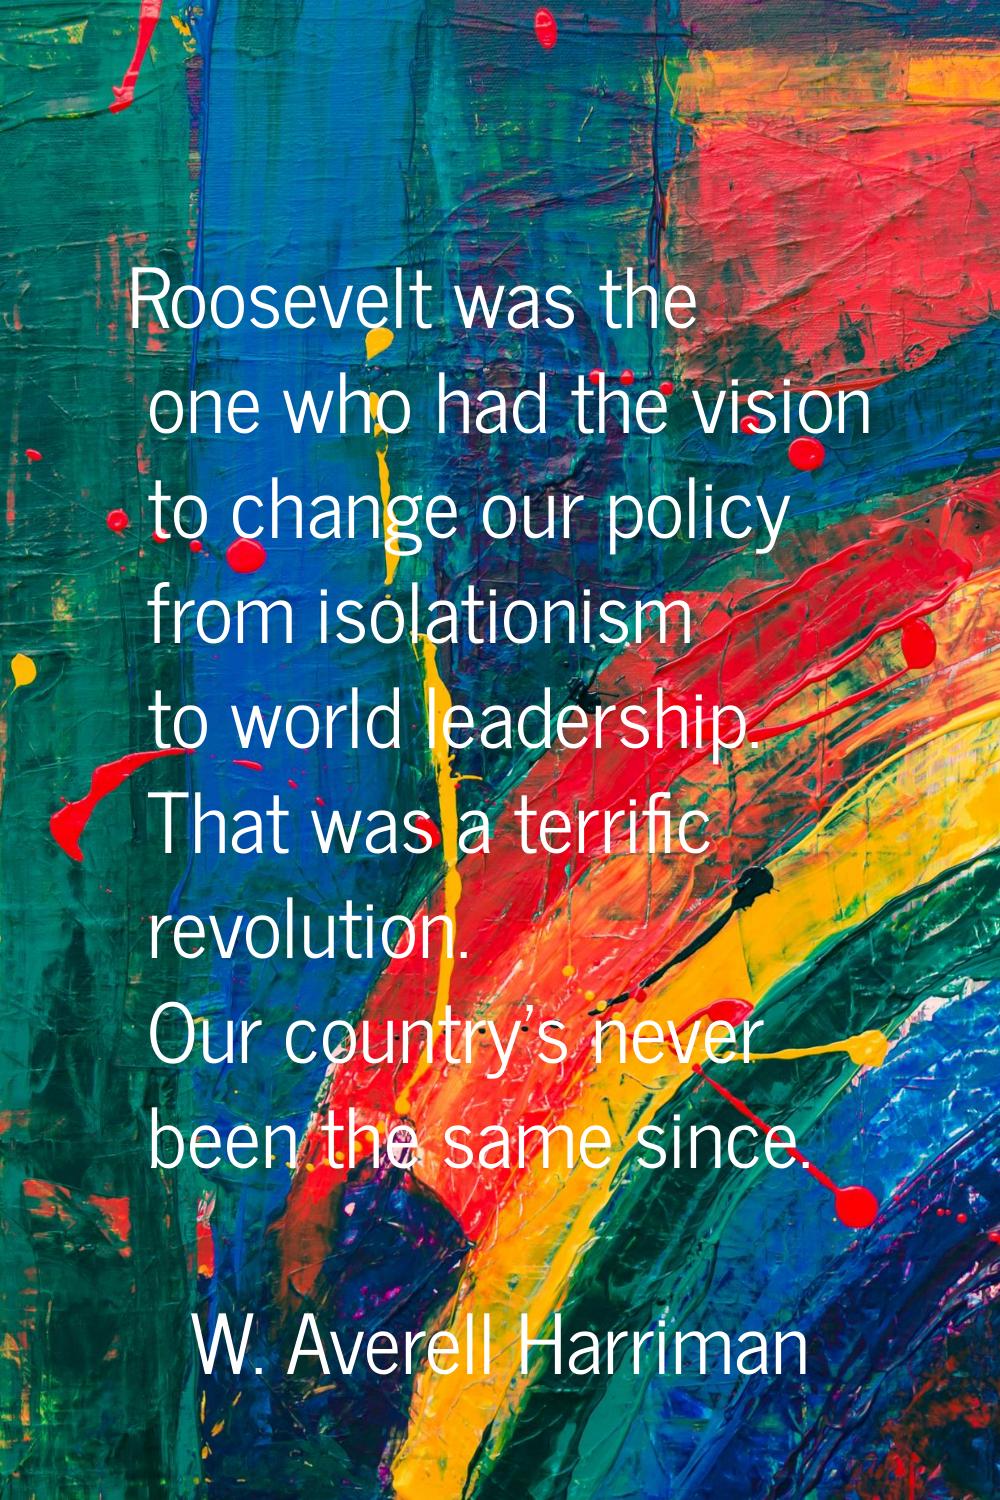 Roosevelt was the one who had the vision to change our policy from isolationism to world leadership